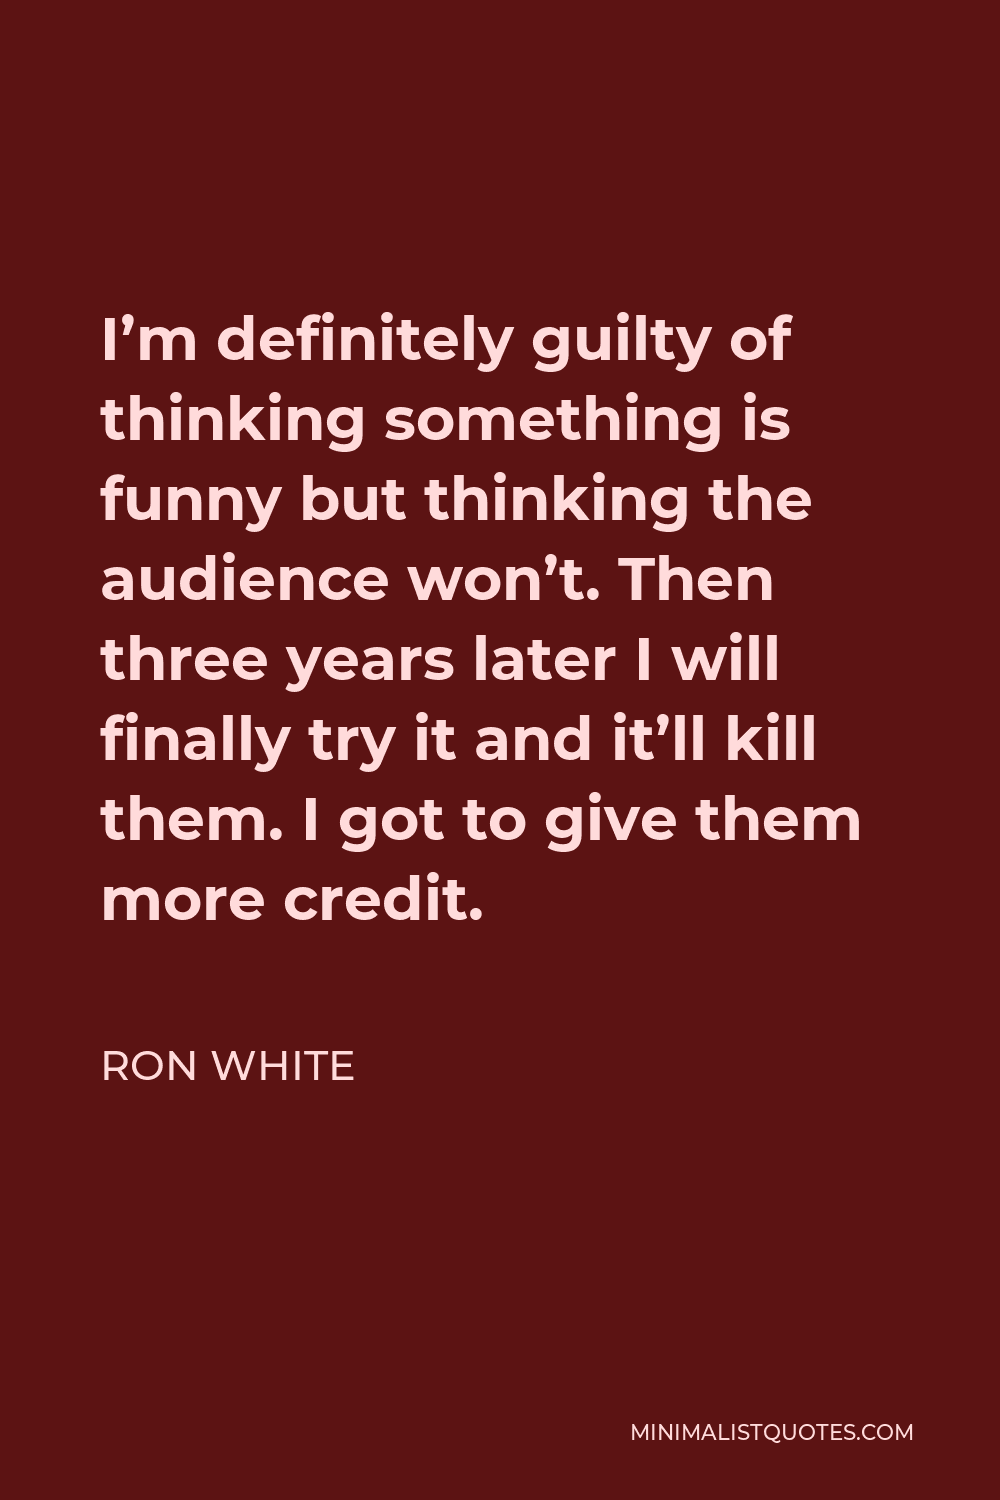 Ron White Quote: I'm definitely guilty of thinking something is funny